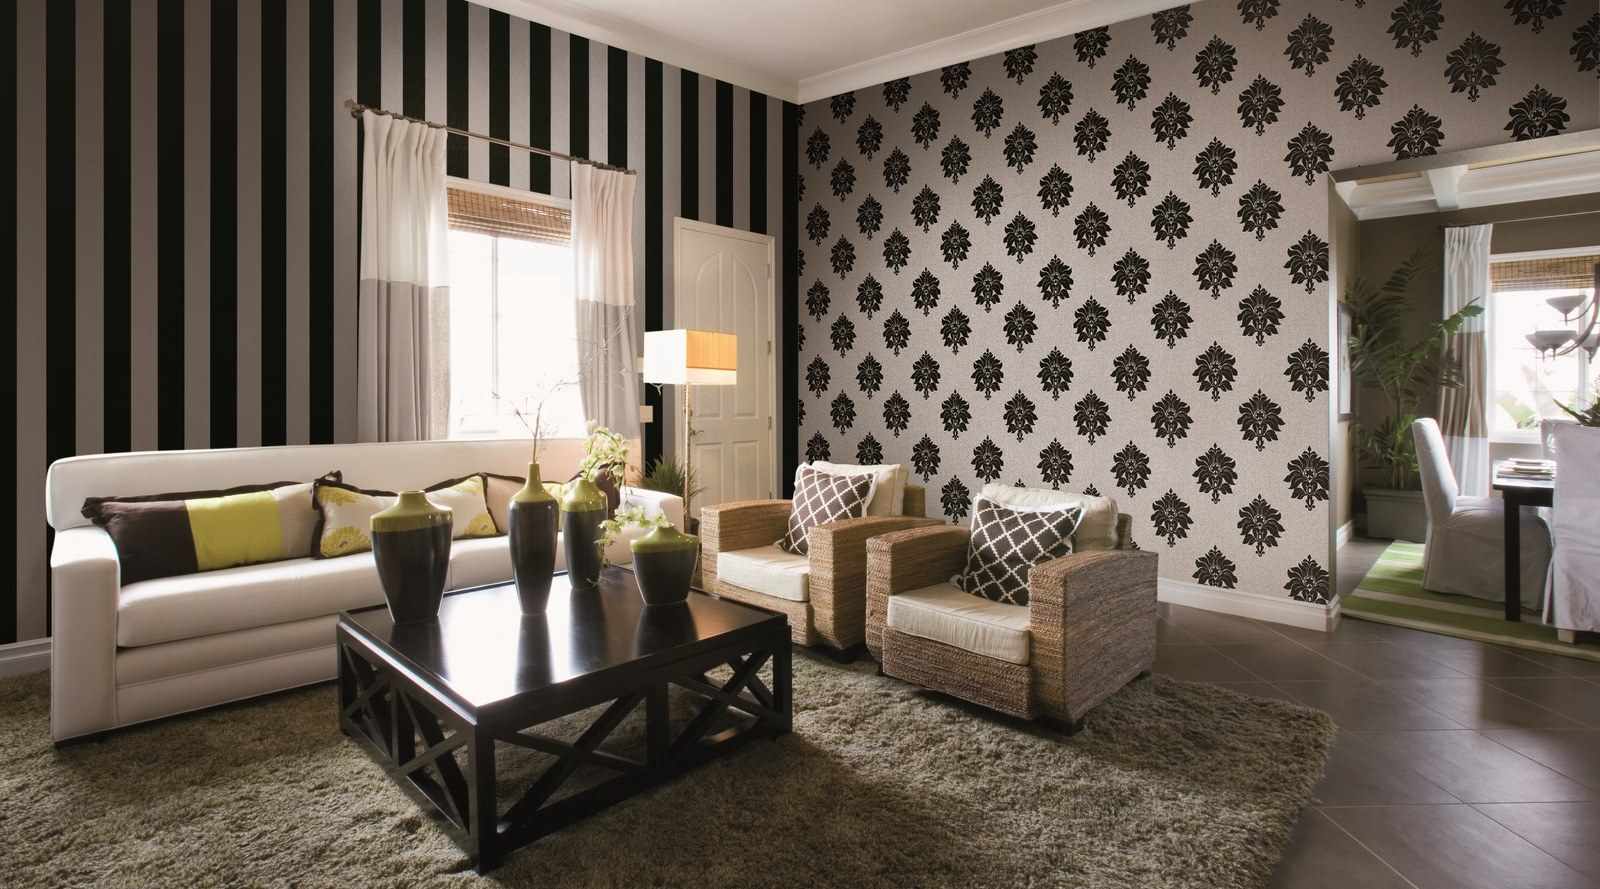 An example of a bright design of wallpaper for the living room